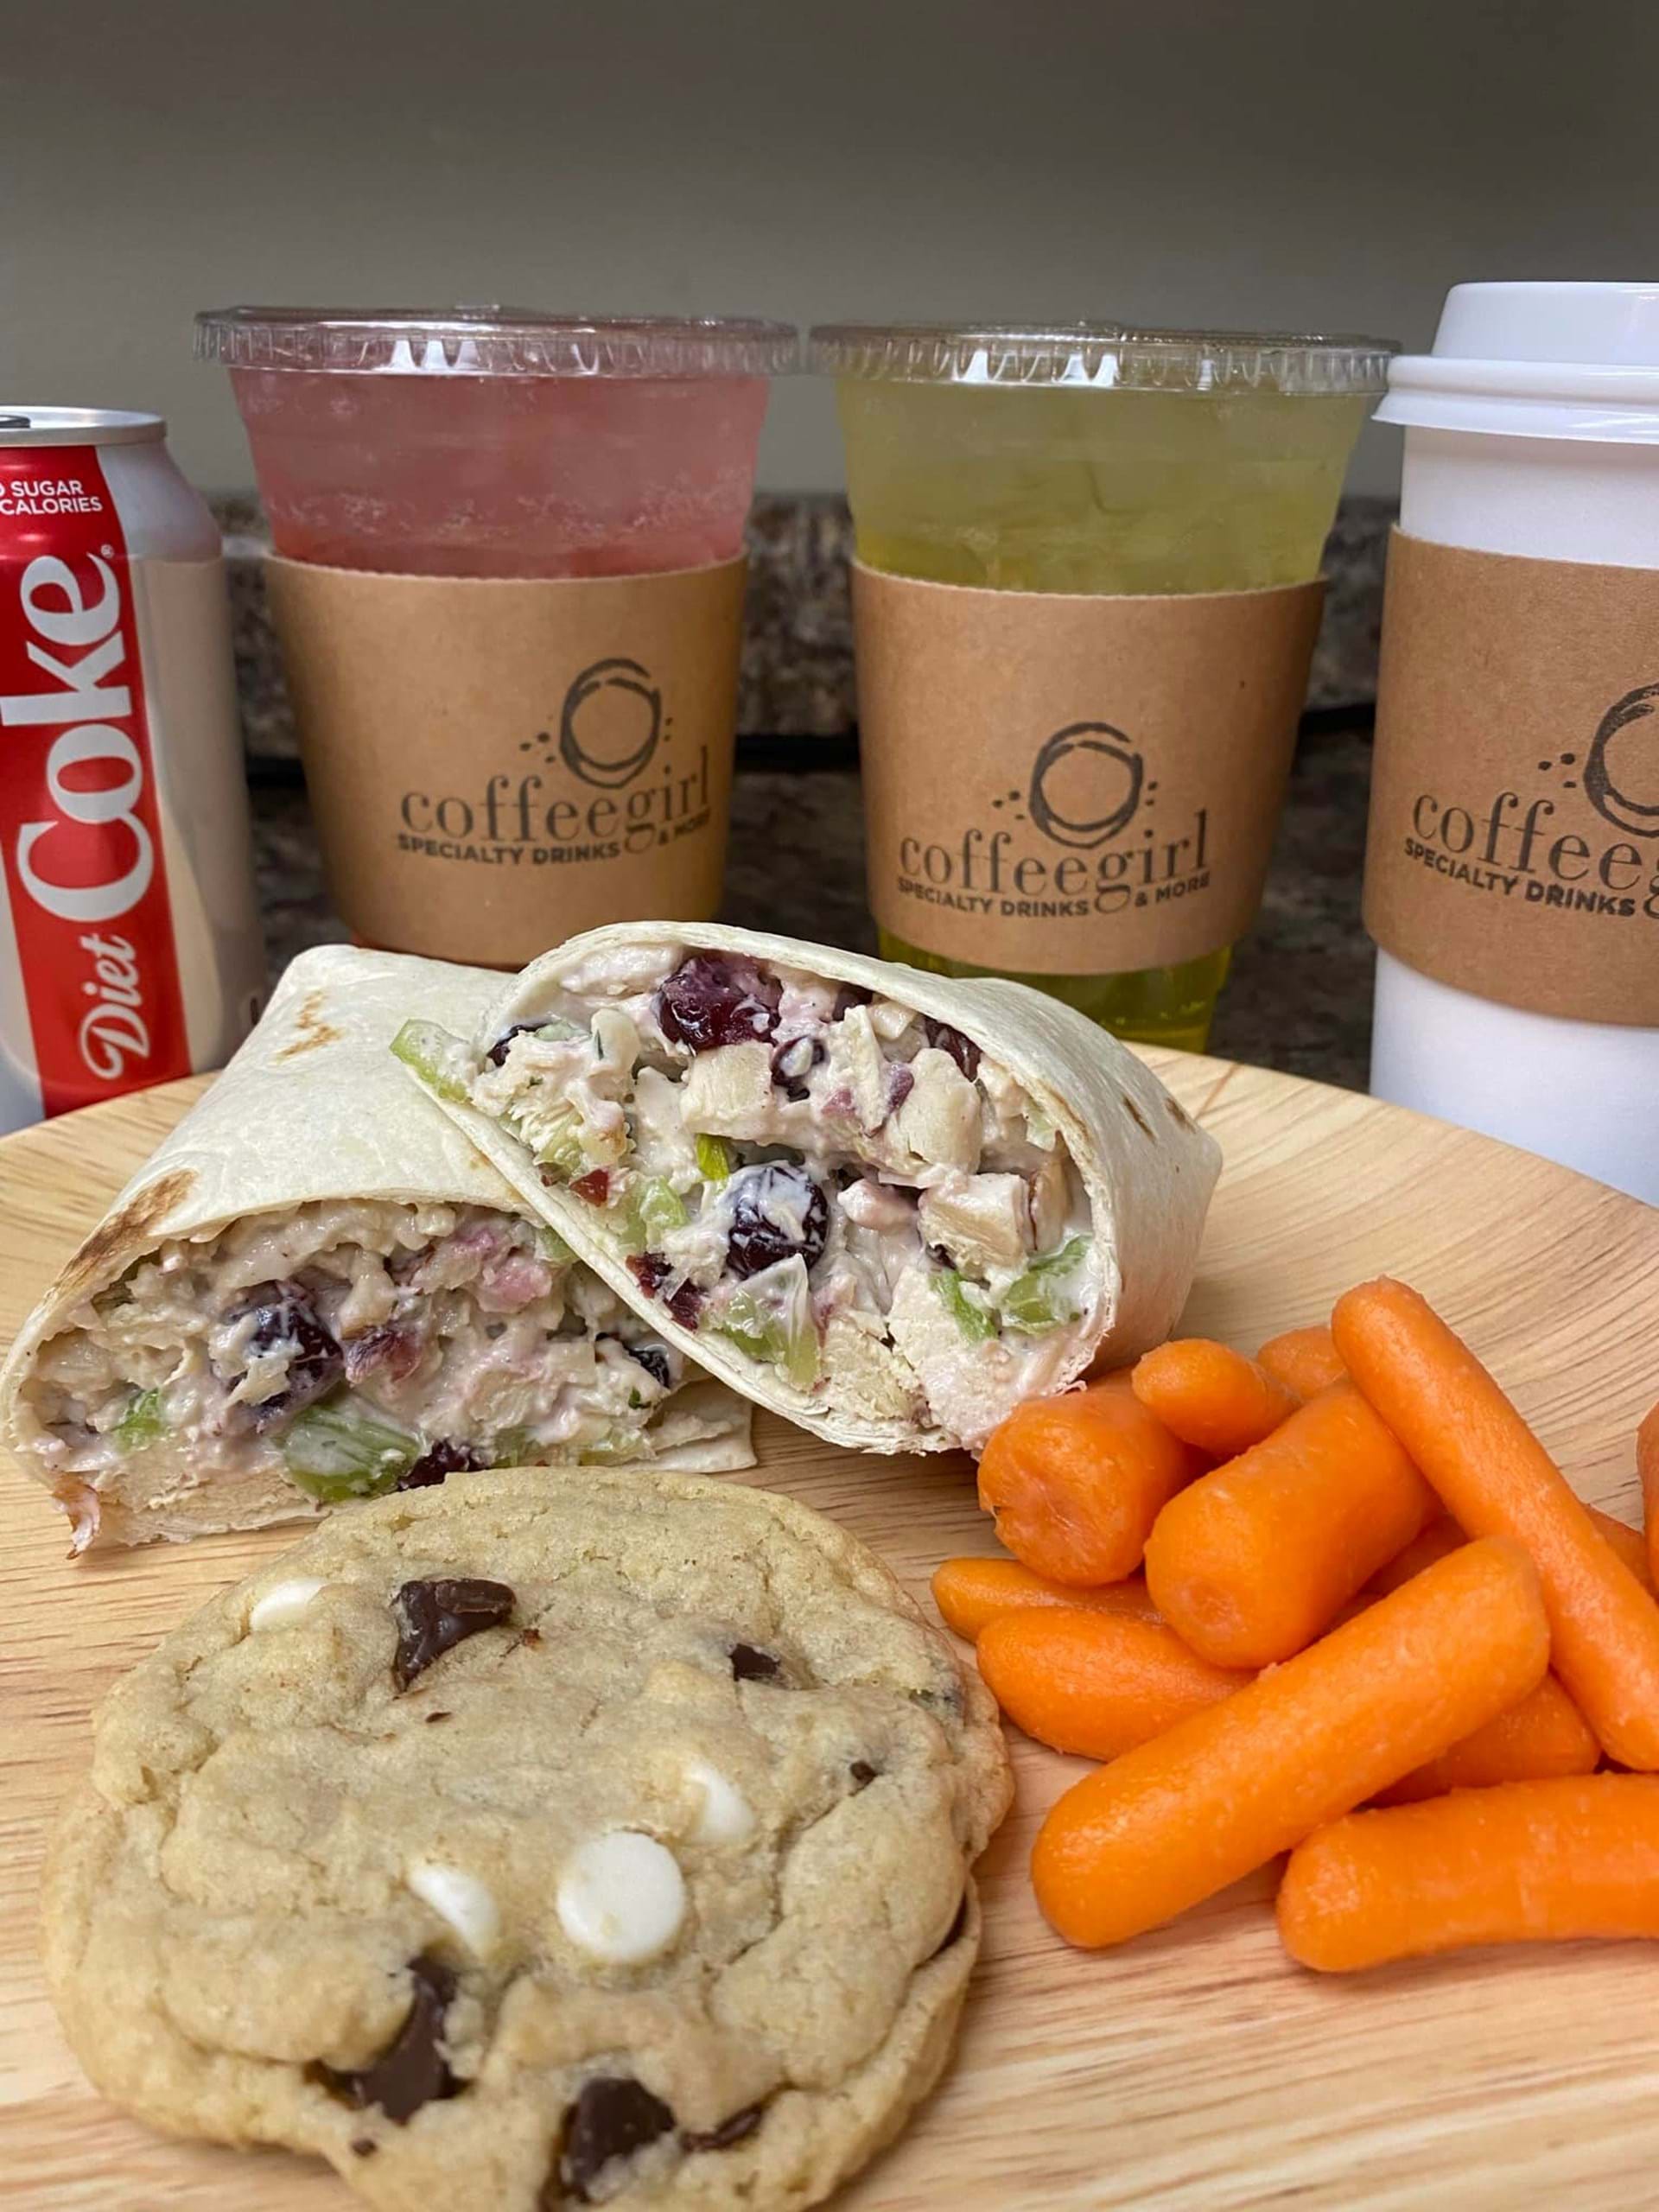 Our famous Chicken Salad wrap and homemade cookies